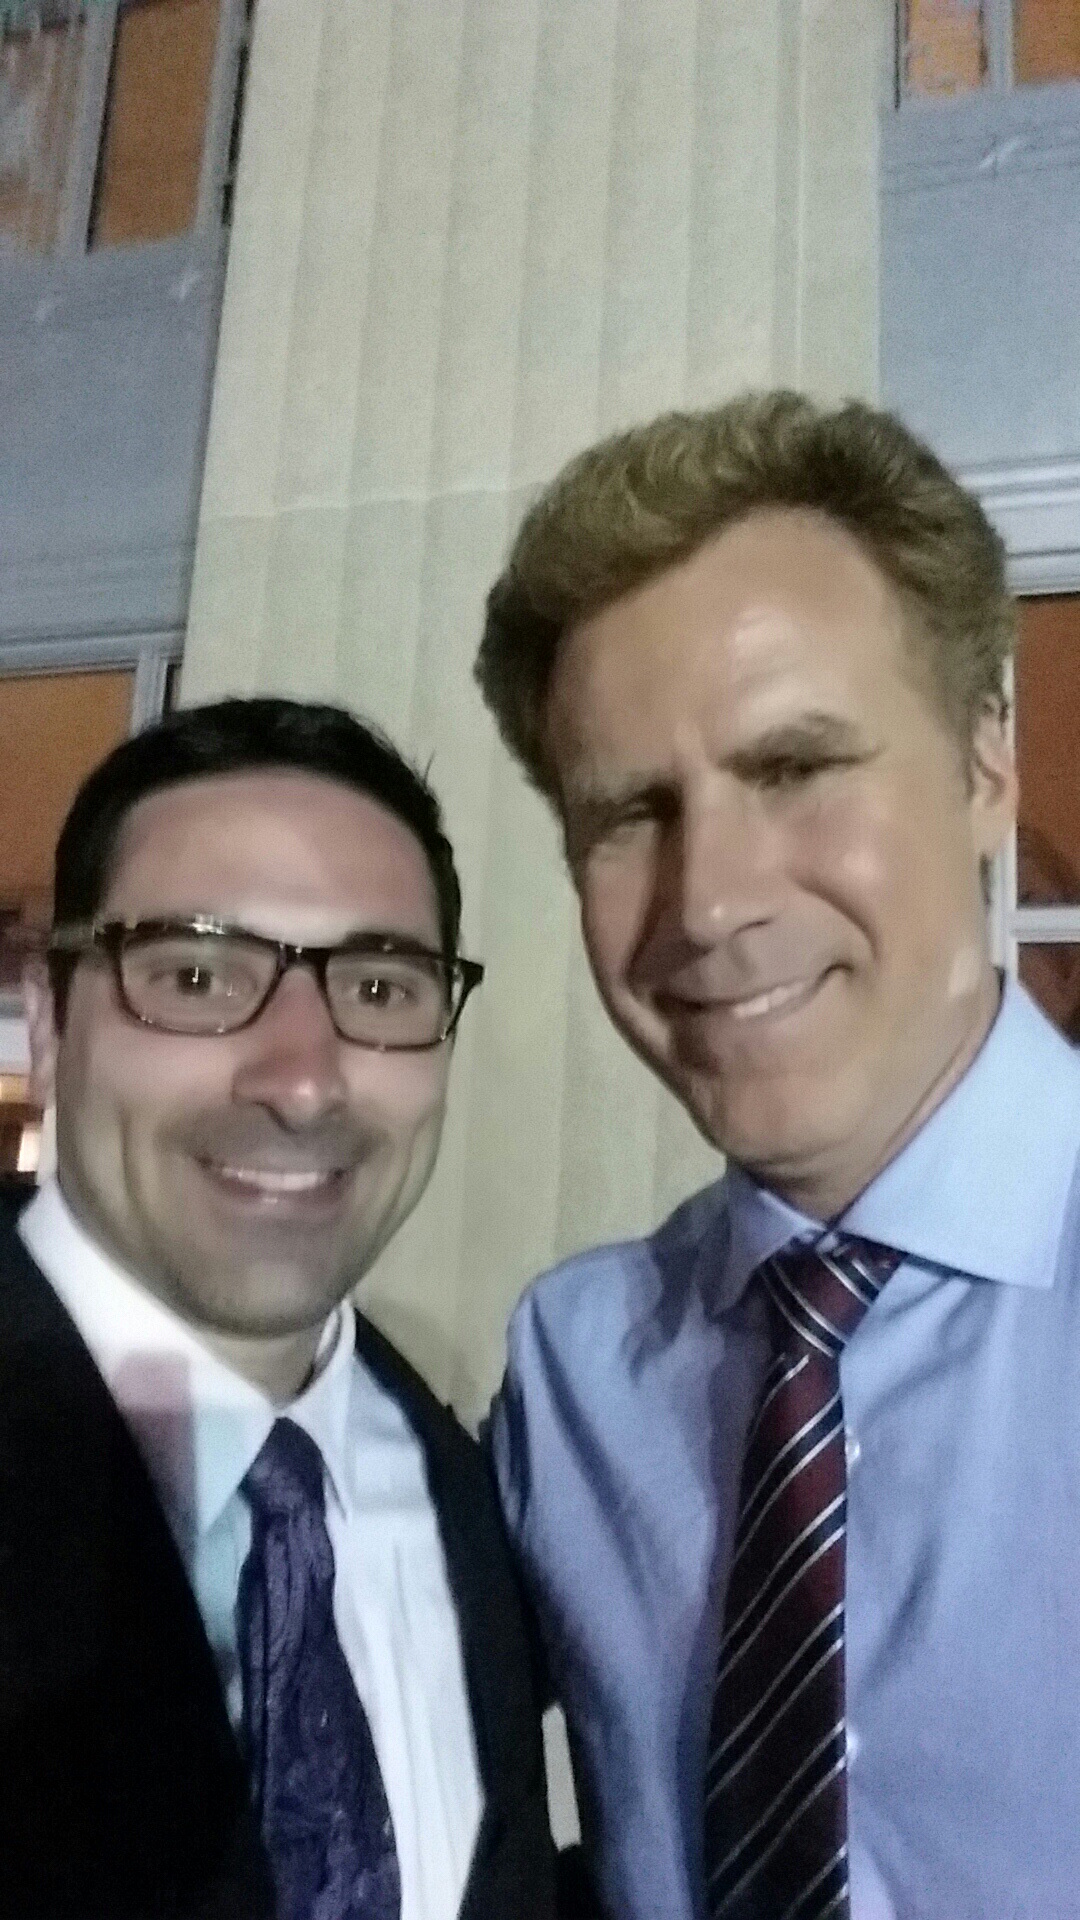 Me and Will Ferrell on the set of Get Hard, in Da Parish! LONG DAY!